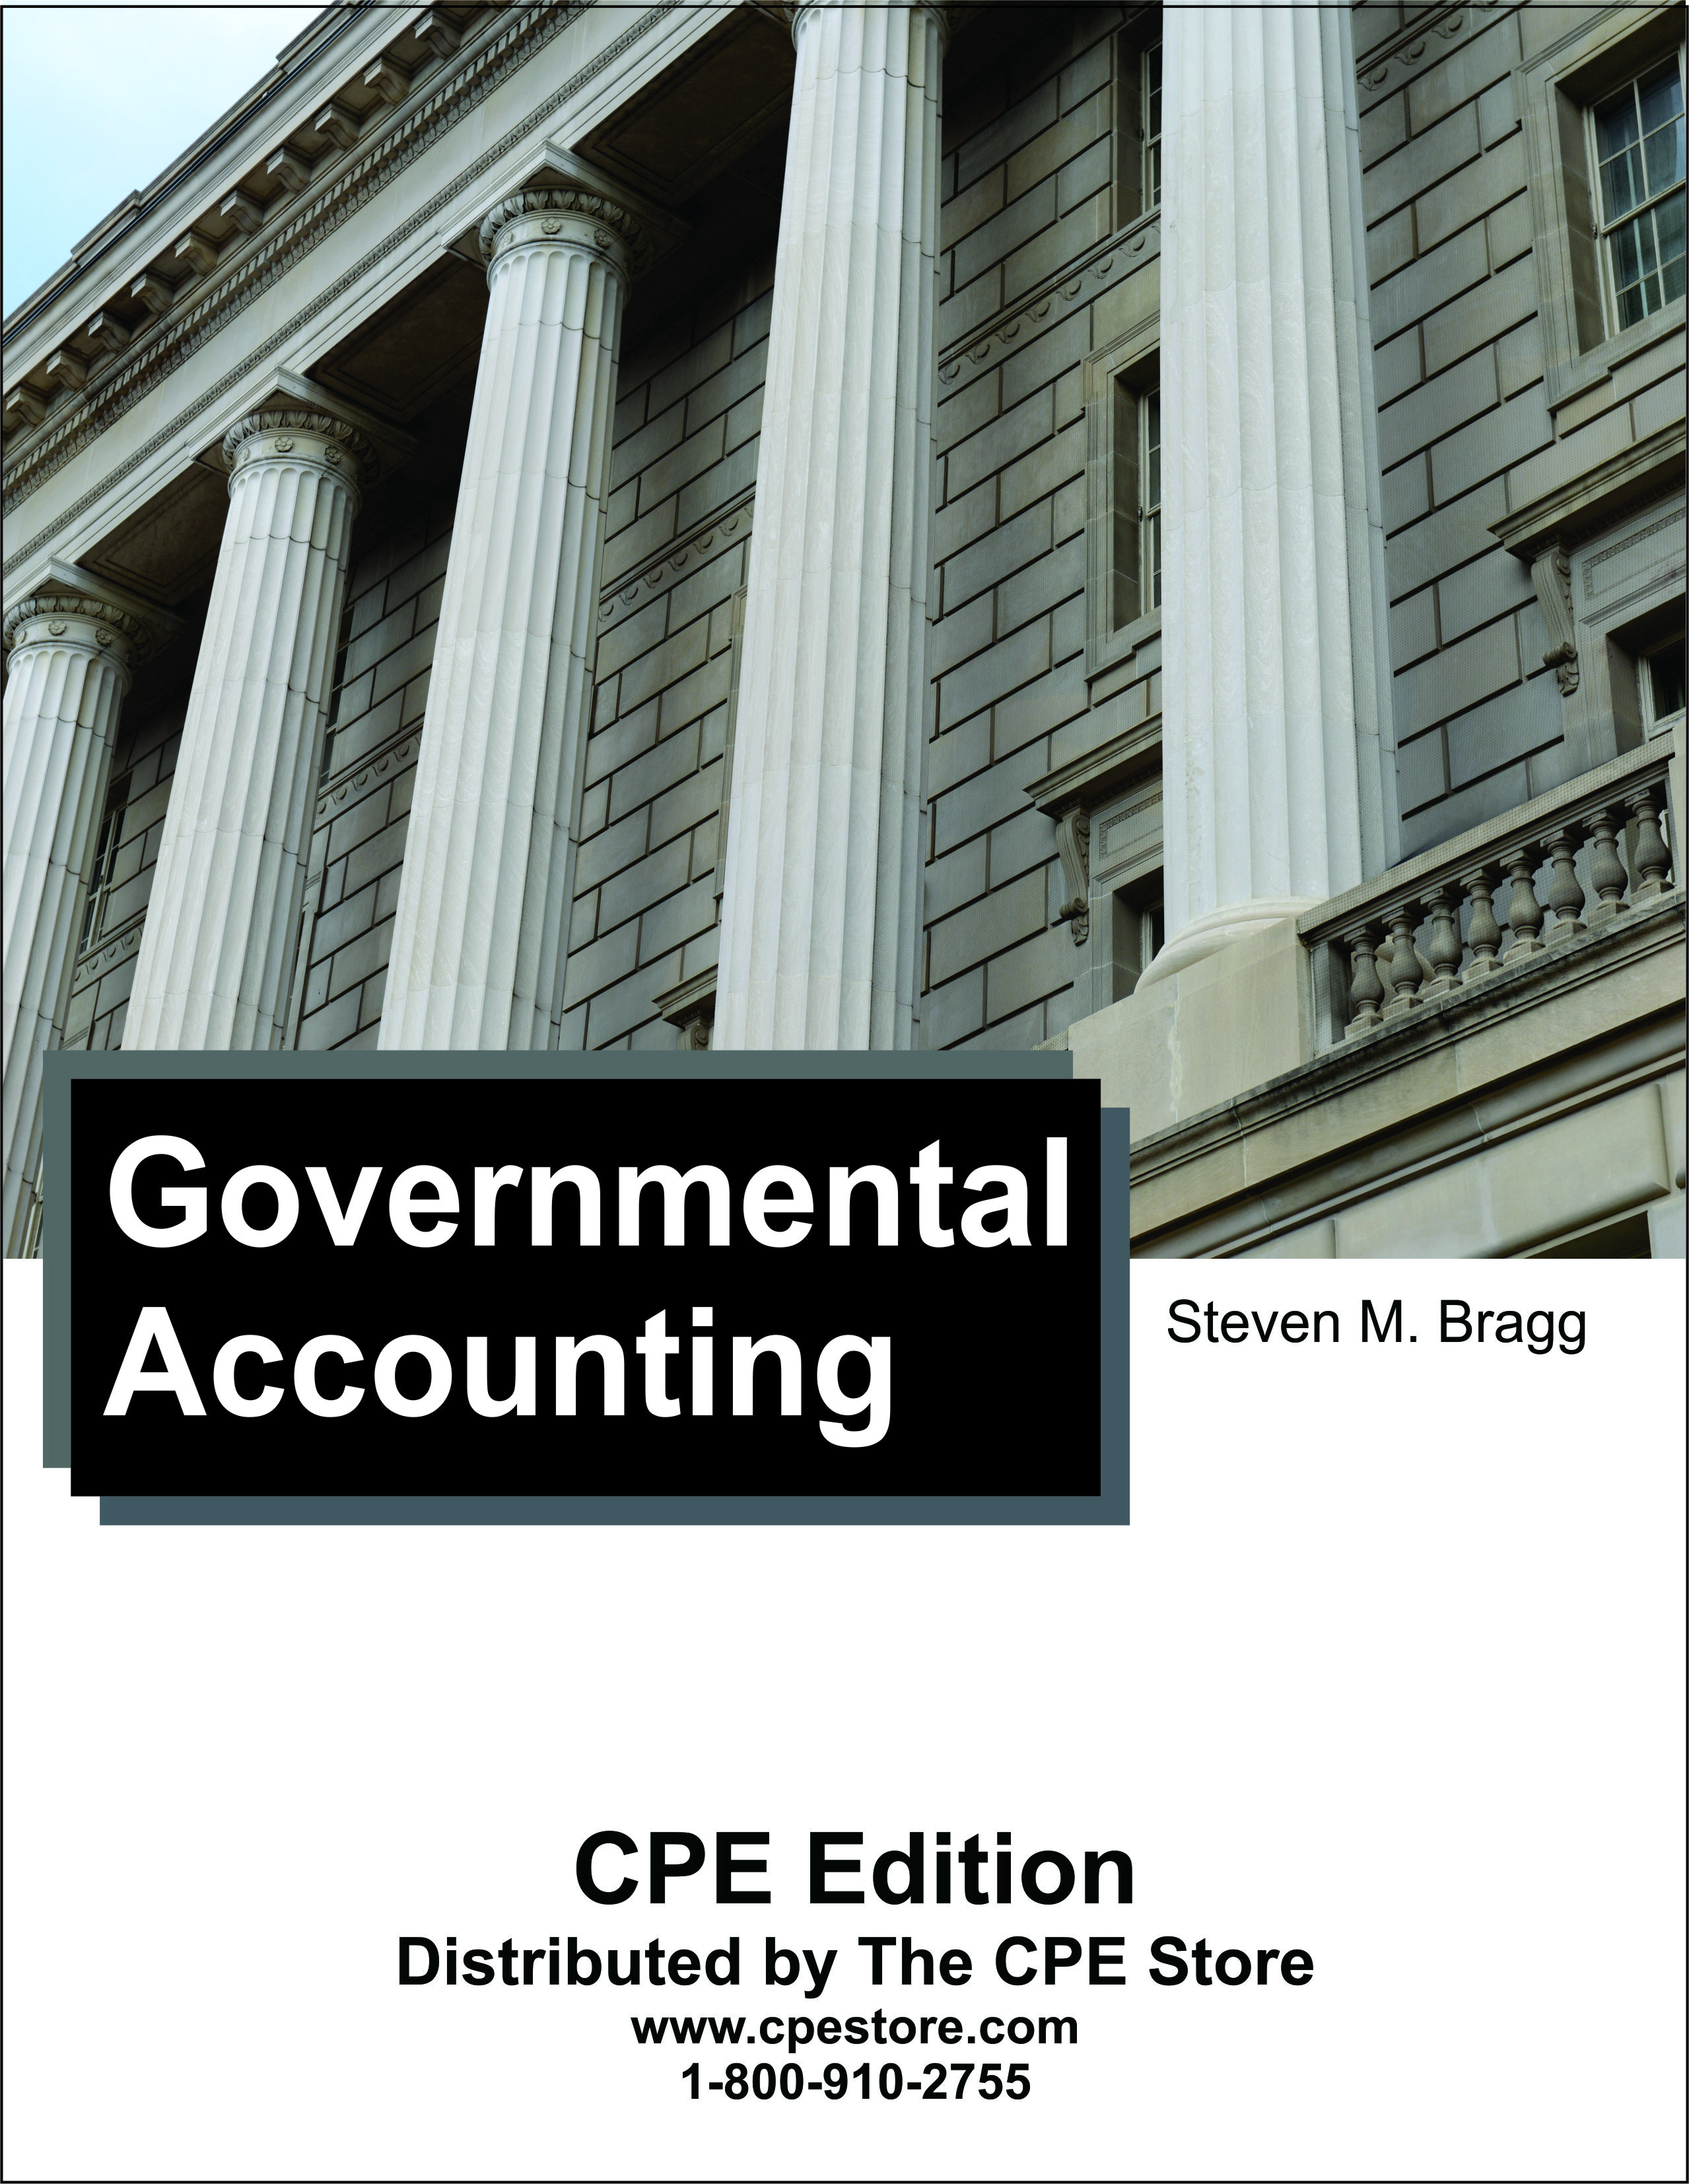 Accounting Amp Auditing The Cpe Store Inc